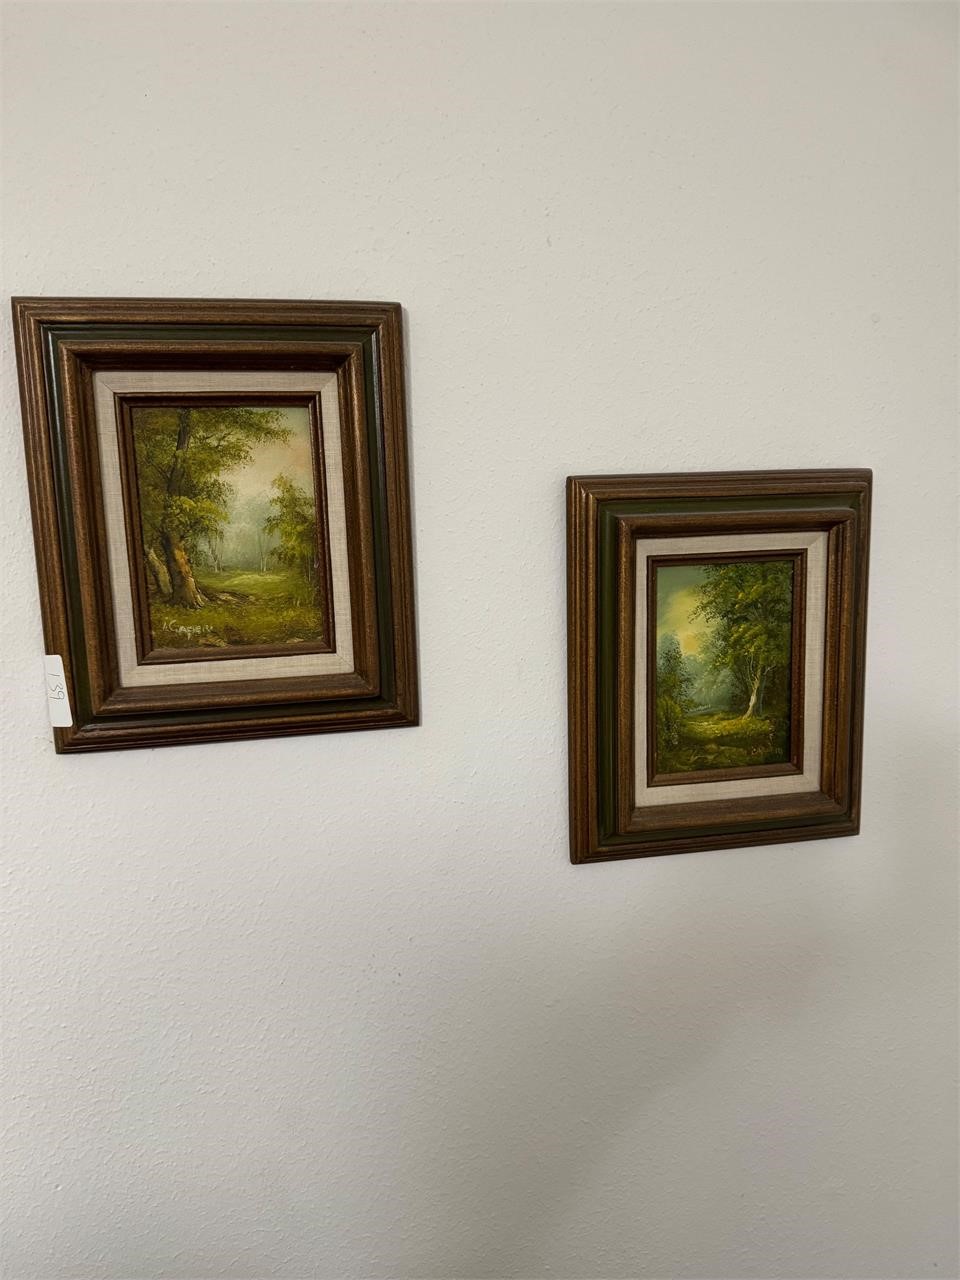 2 SMALL OIL PAINTINGS FRAMED